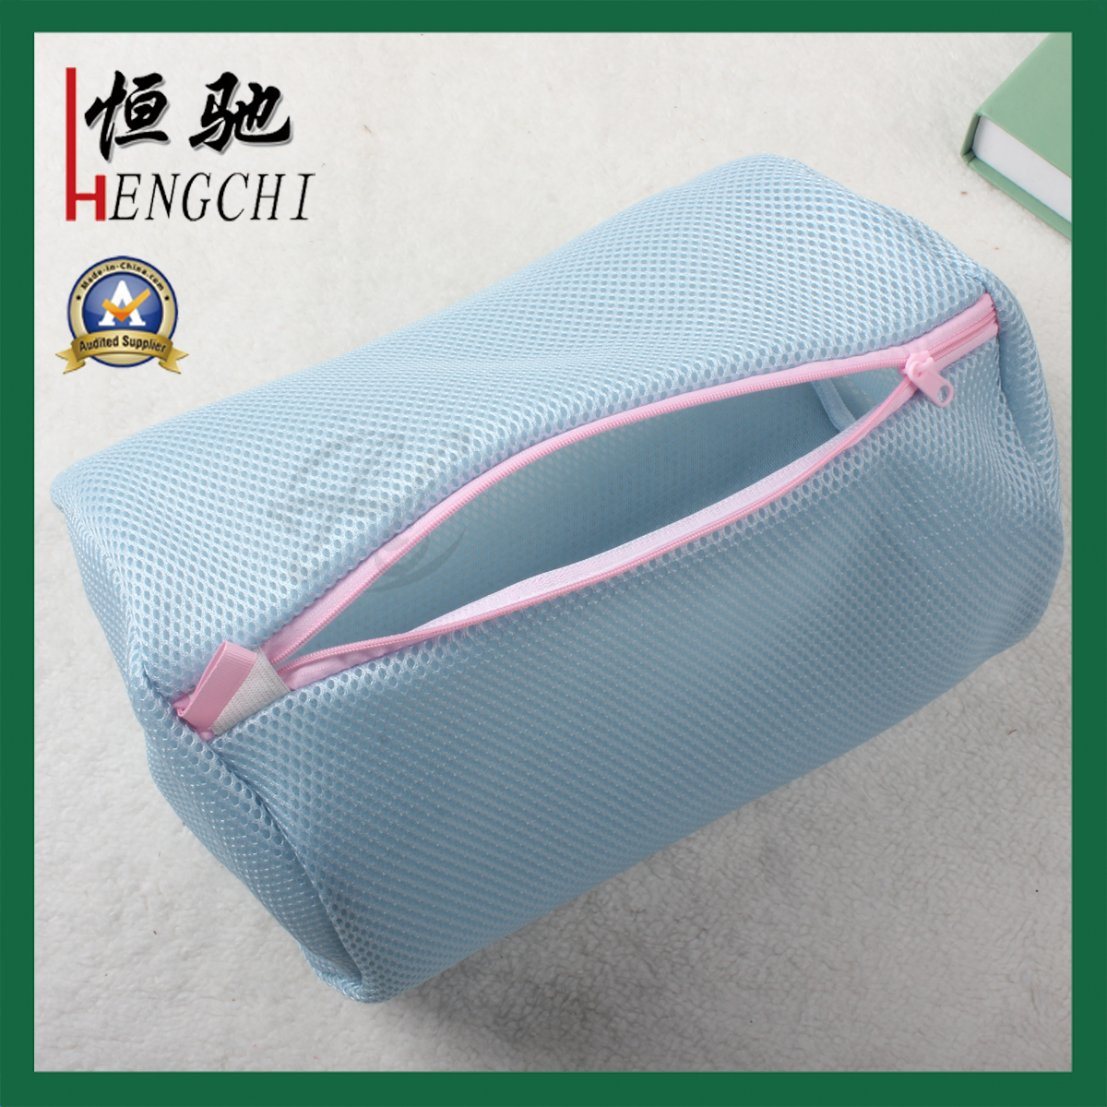 Net Travel Polyester Washing Laundry Bag for Trousers/Apparel